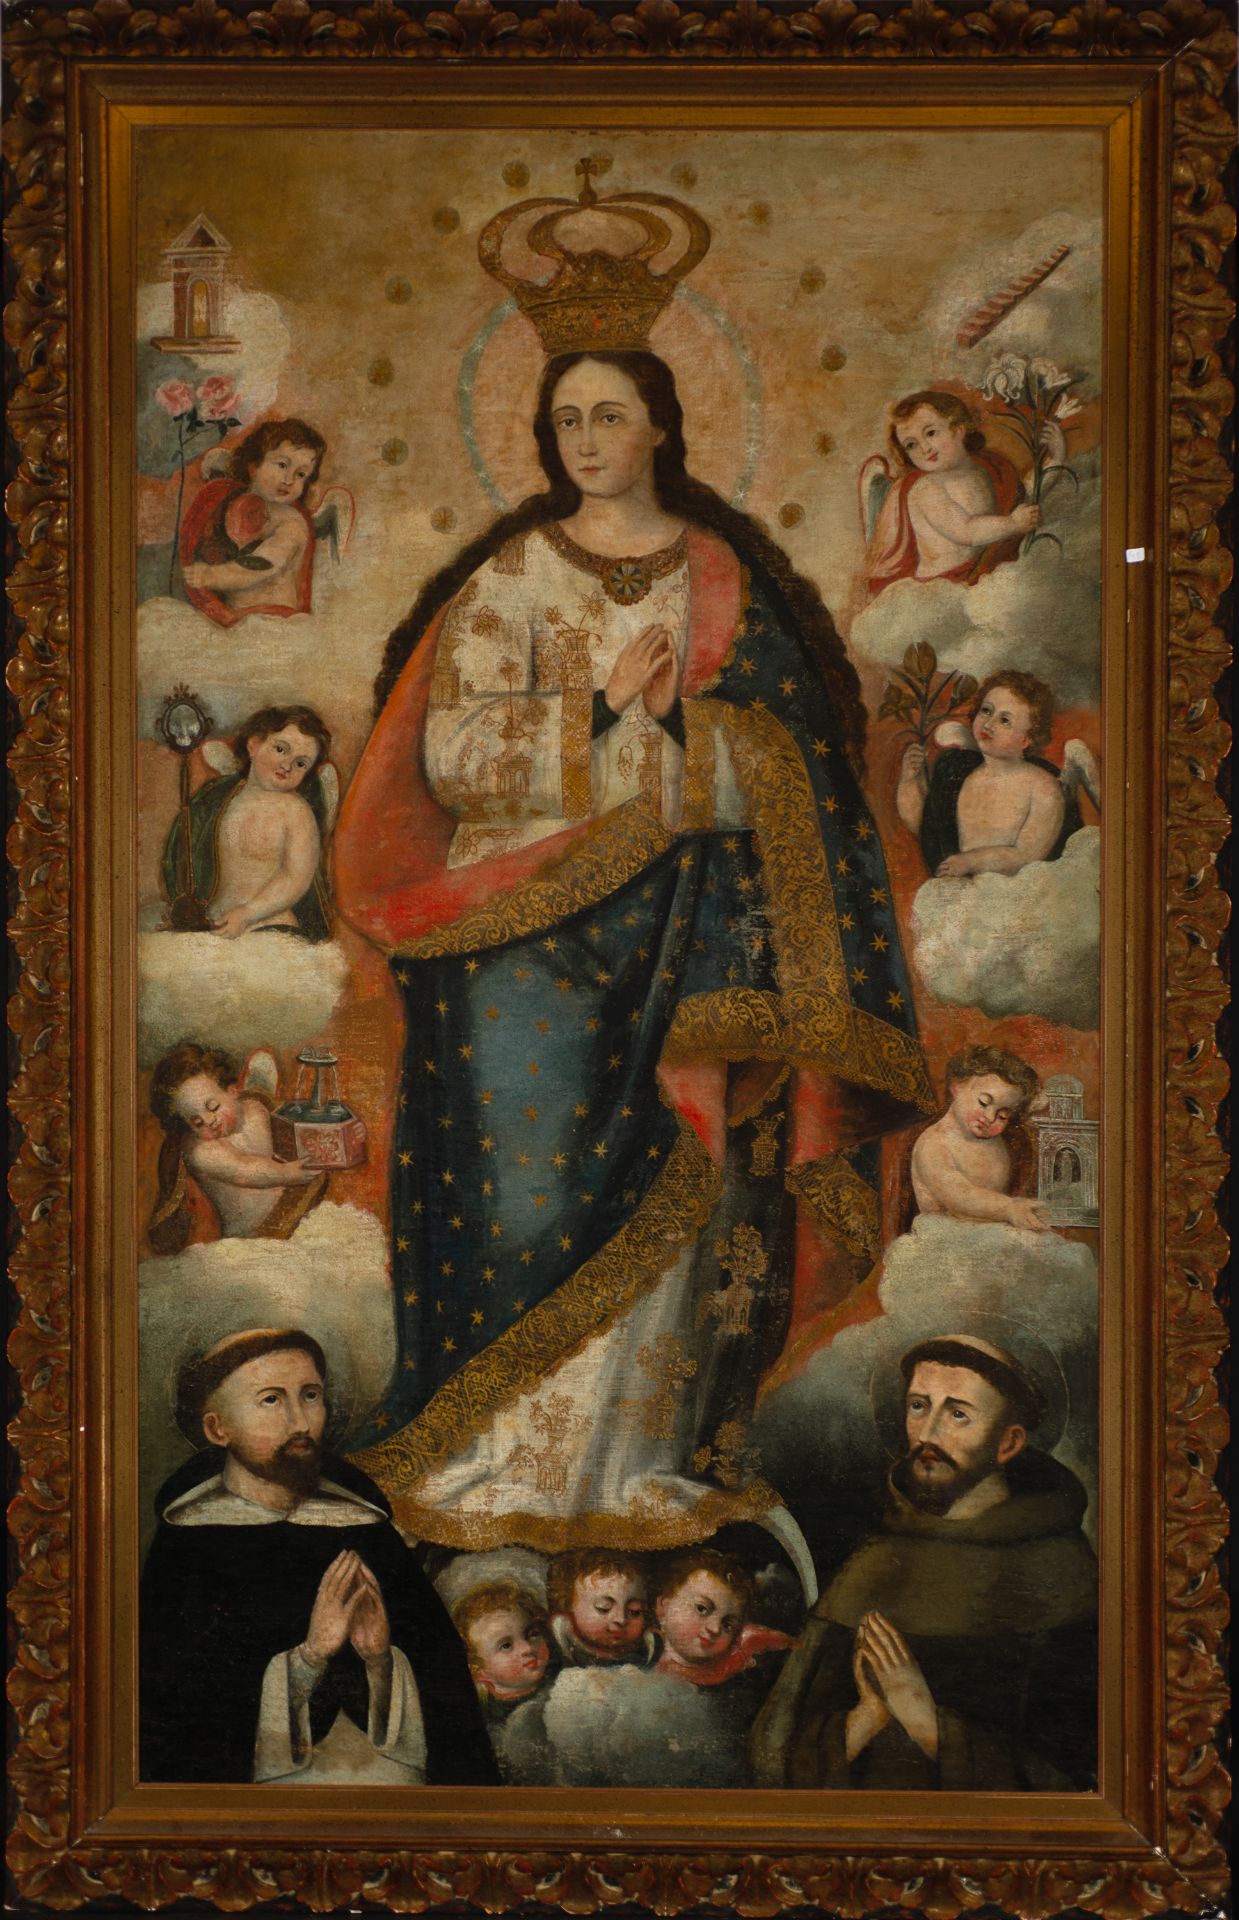 Immaculate Conception surrounded by Saint Francis and Santo Domingo de Guzmán, 17th century colonial